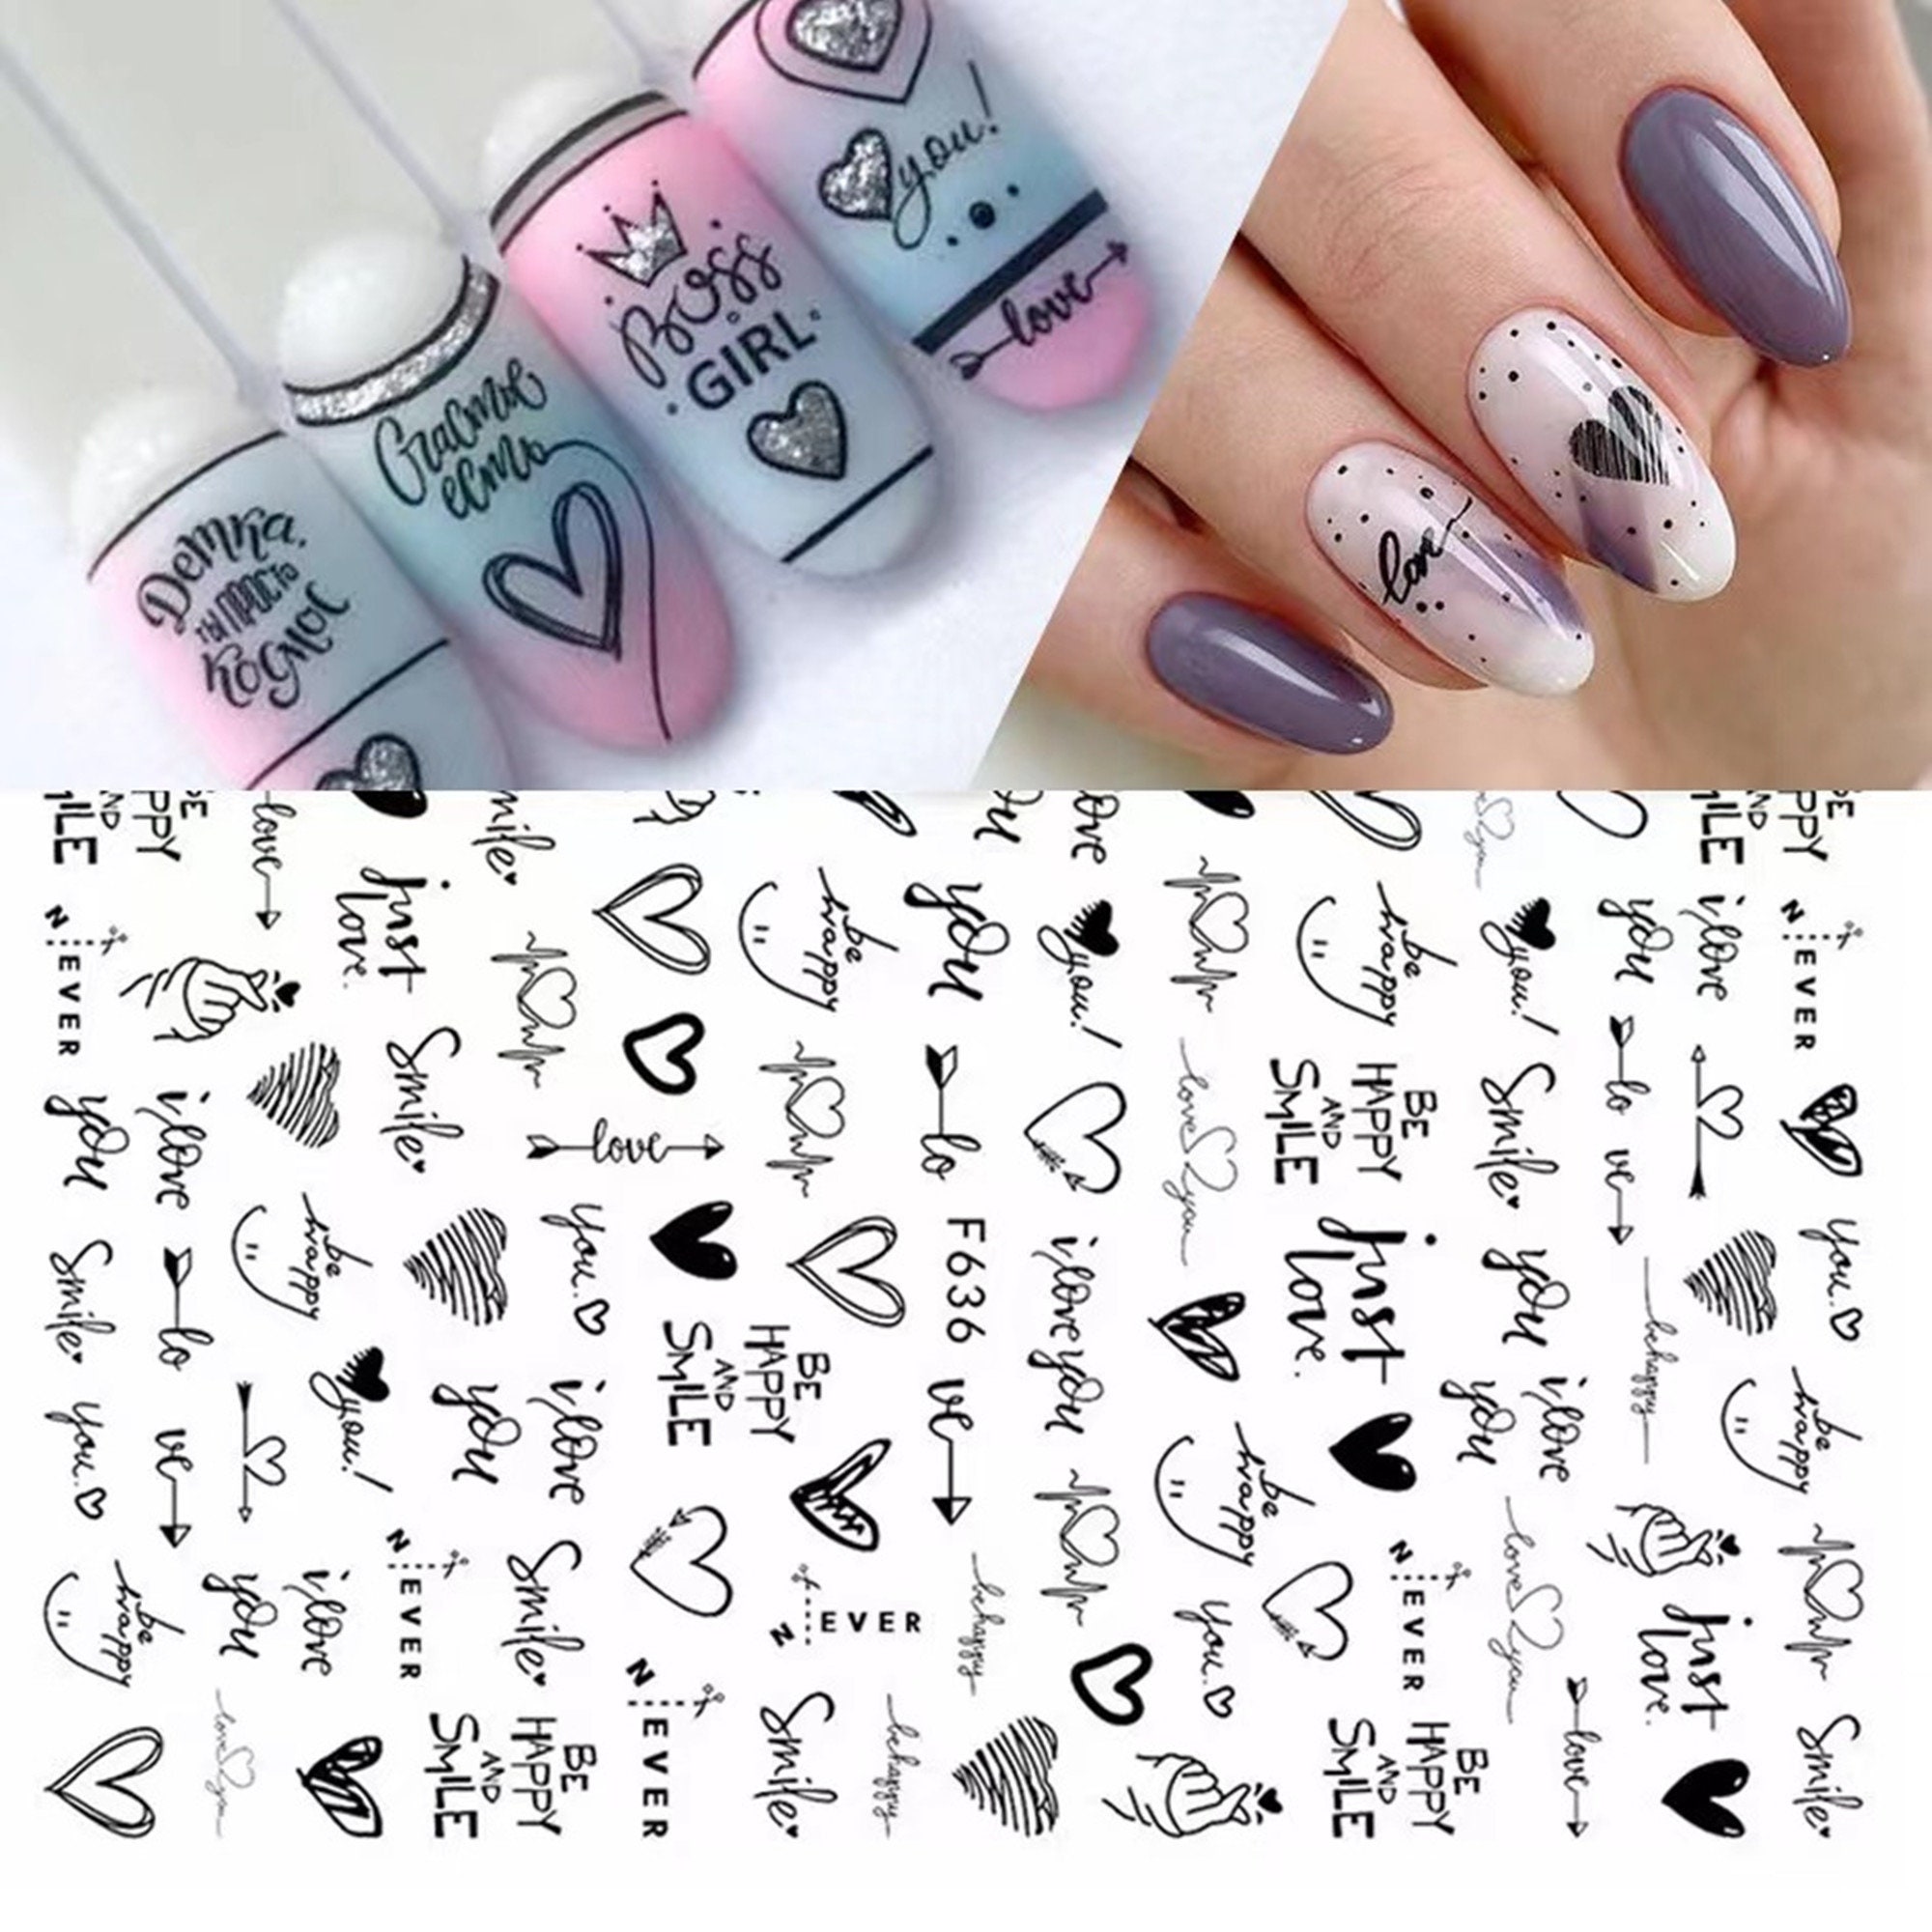 Valentine's Day Nail Art Ideas: Love Is In the Air